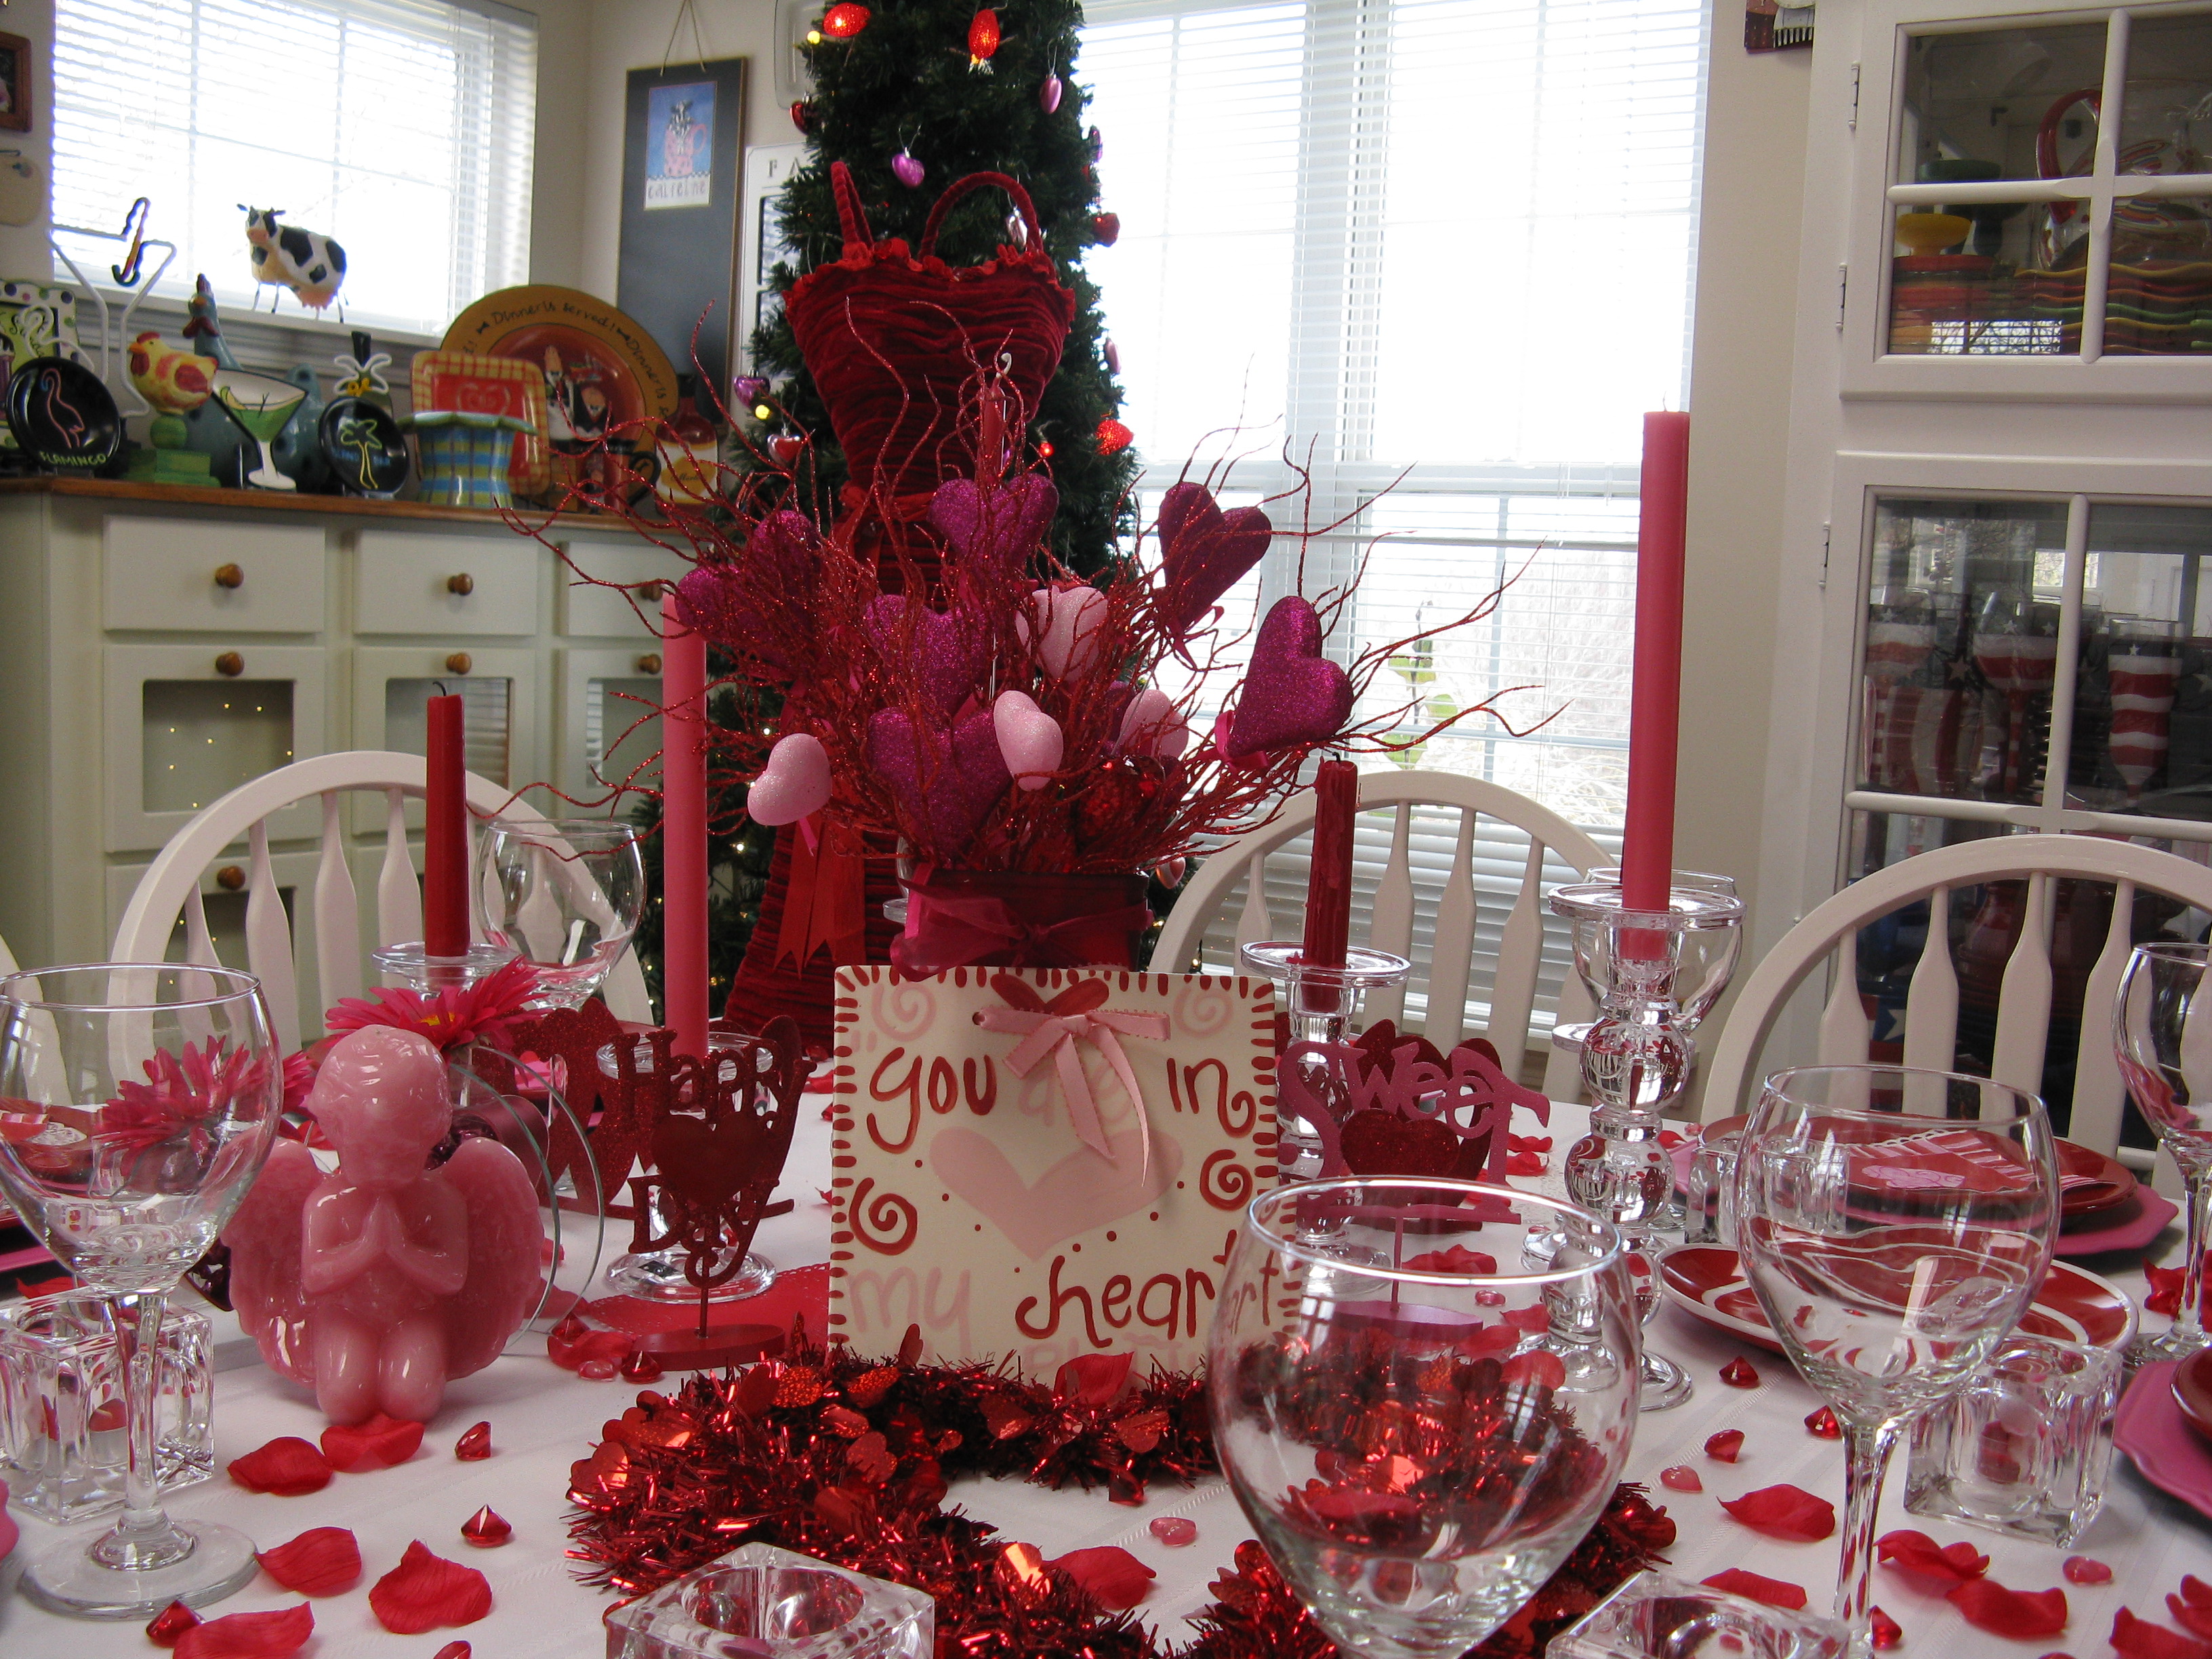 Mesmerizing-dining-table-valentines-day-decorations-ideas-with-sprinkling-rose-and-romantic-centrepiece-also-red-candle-light (1)